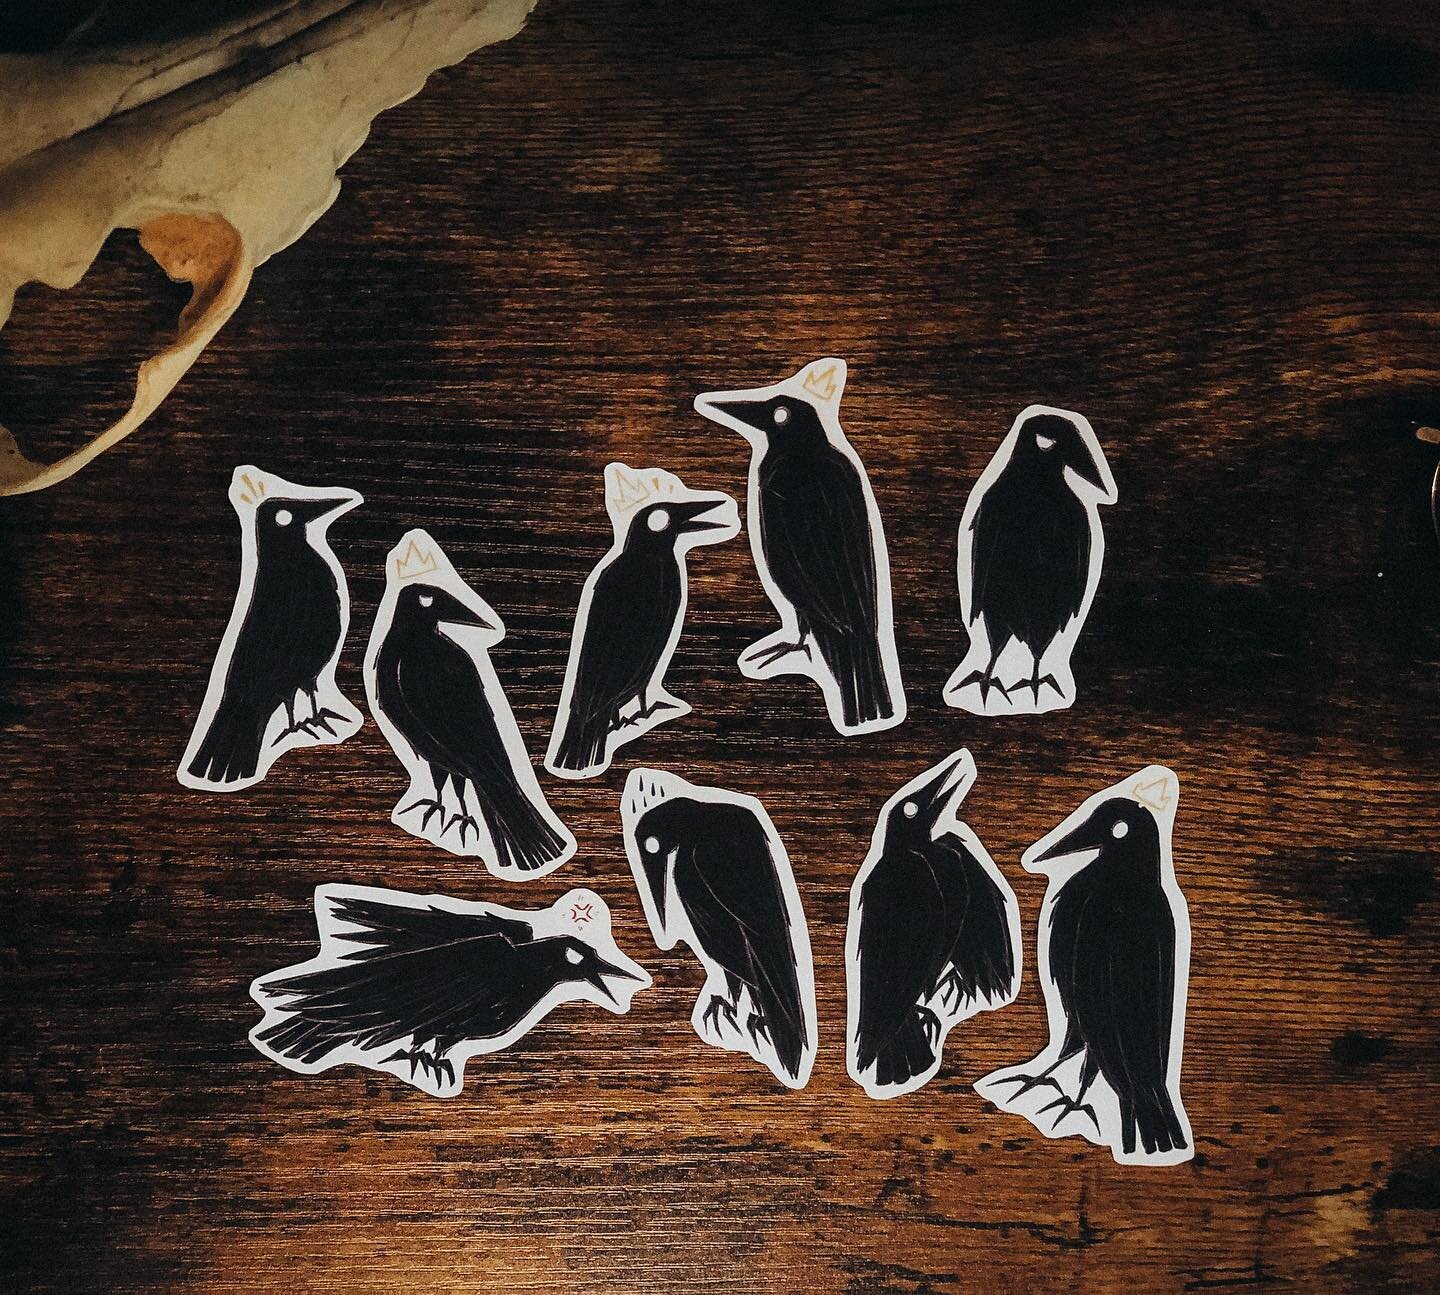 Introducing some Little Crows 😉

I drew these up for @thelittlecrowsmarket and these will be sent out for those who selected a sticker pack as part of their Indiegogo rewards as well as Sticker Club for the Patreon!

I had a lot of fun trying to mak